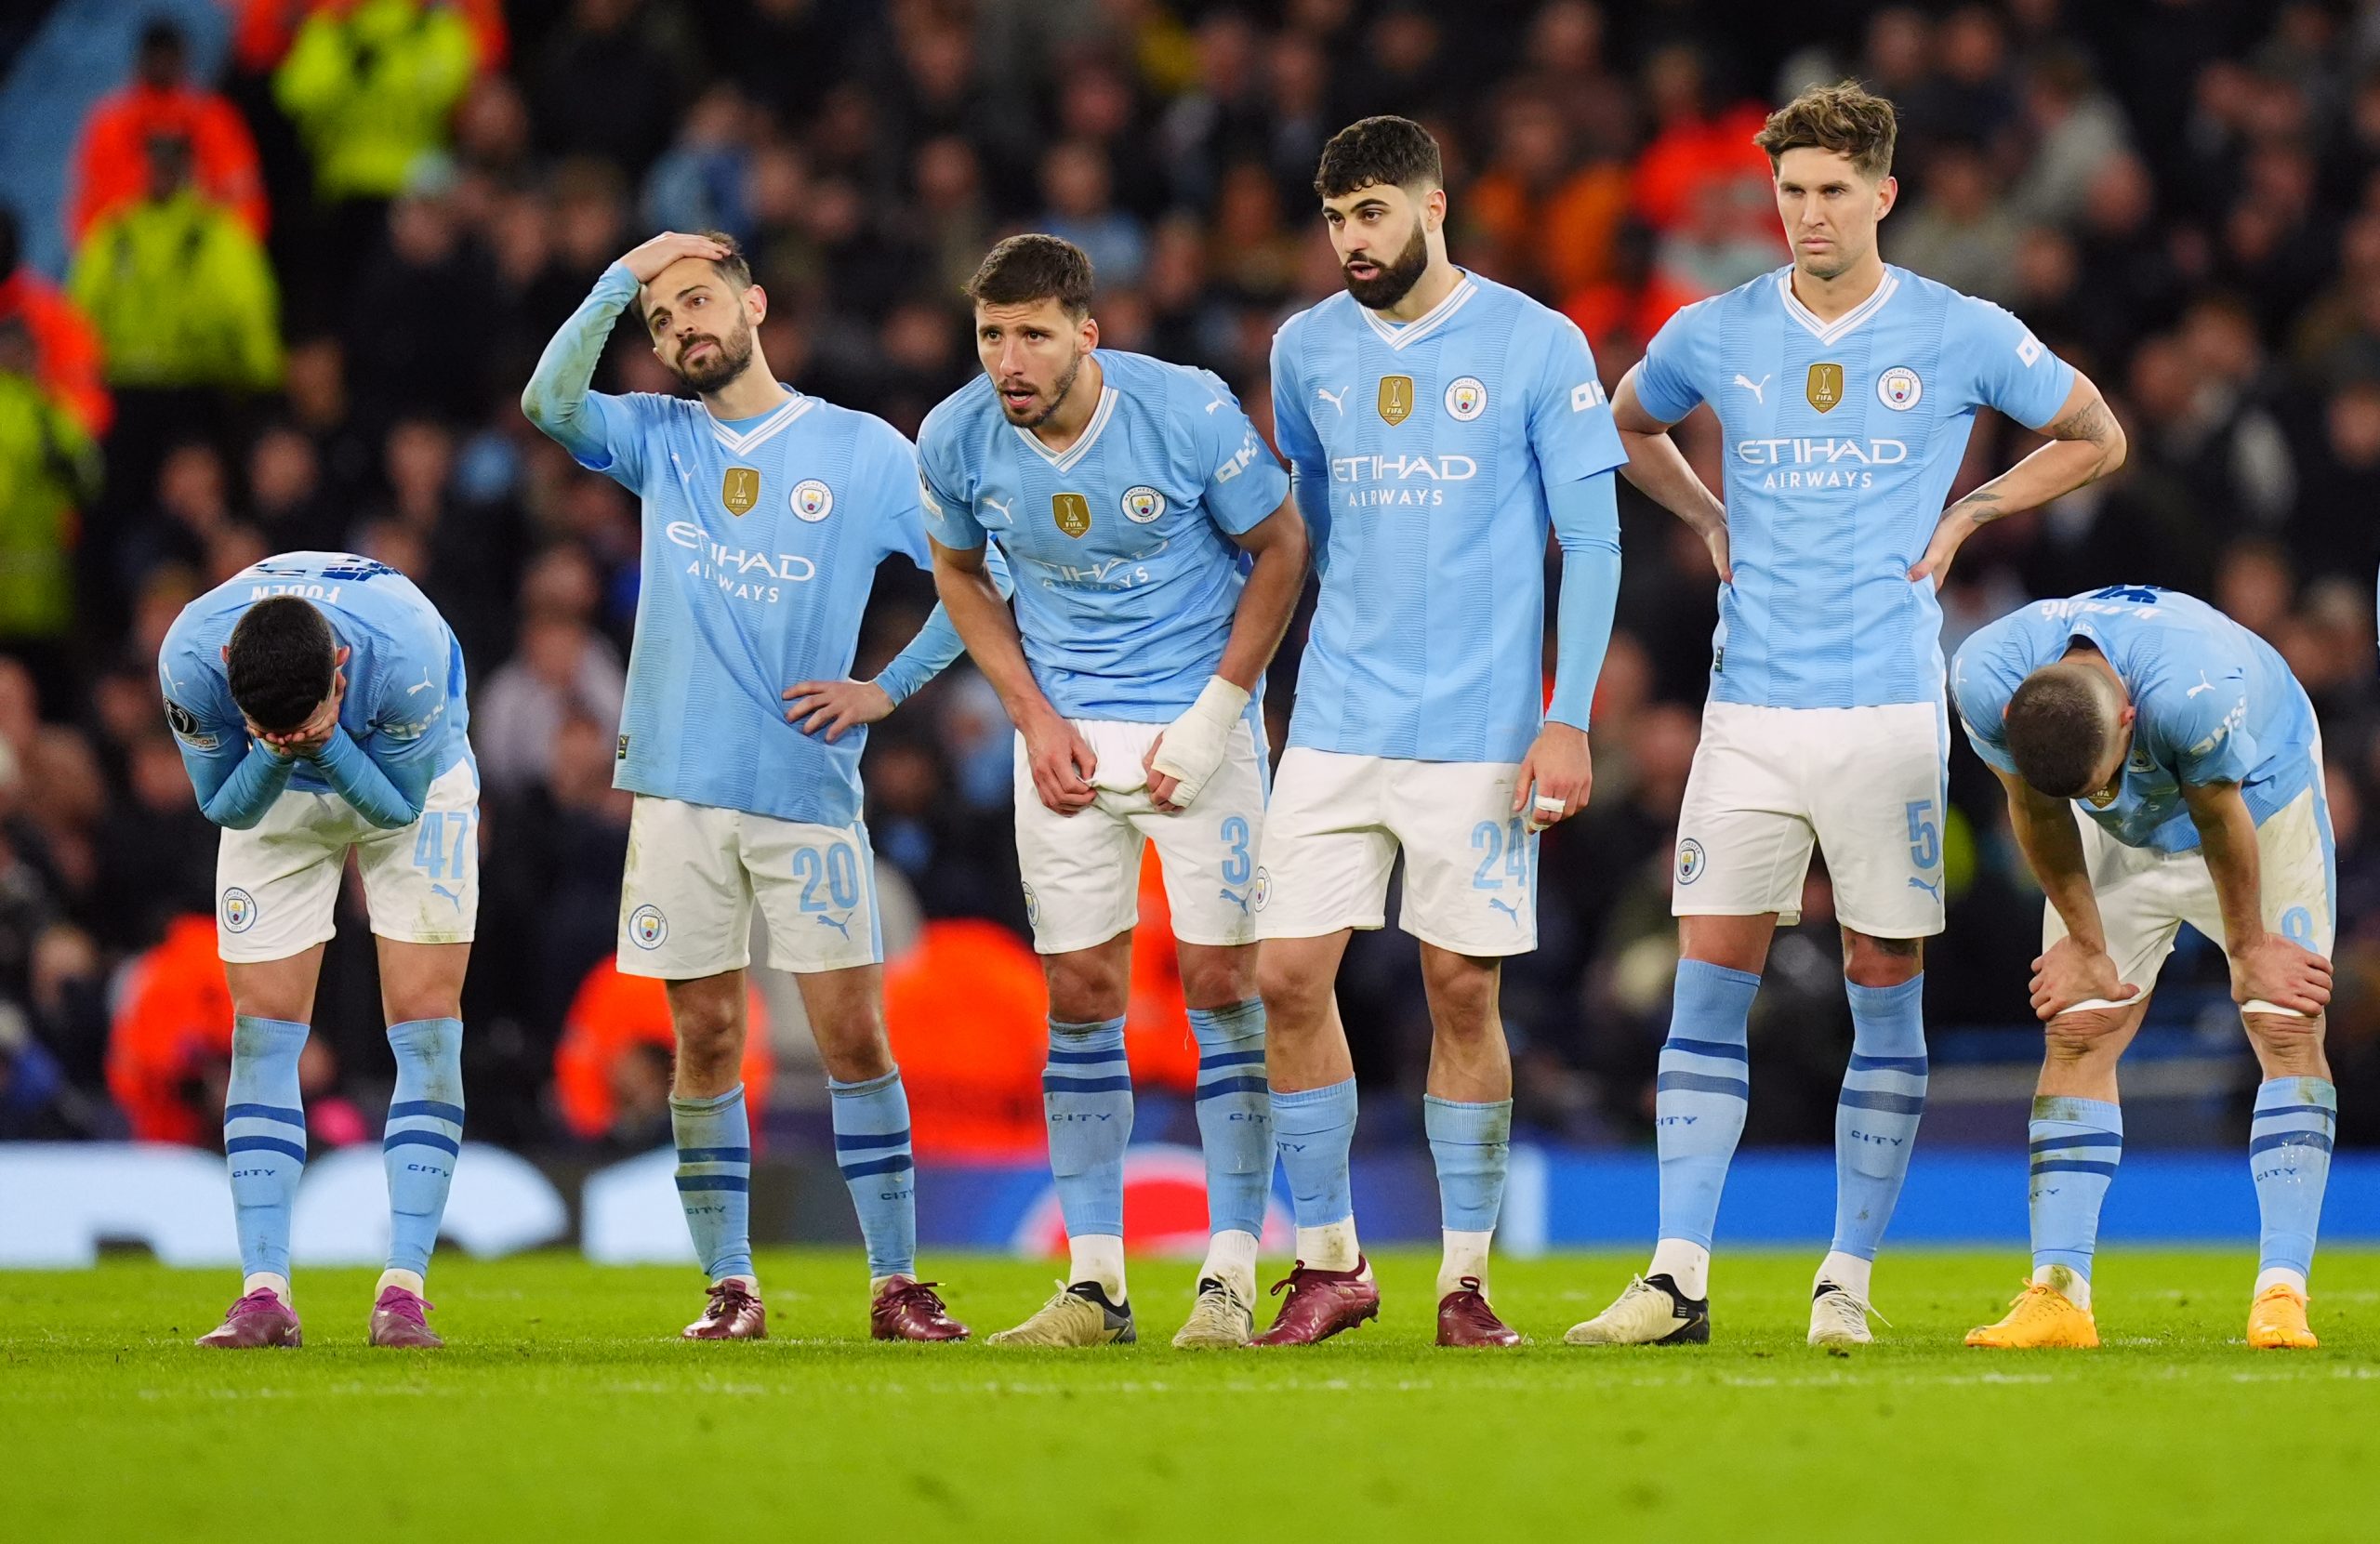 Manchester City players look on dejected during the penalty shoot out following the UEFA Champions League quarter-final, second leg match at the Etihad Stadium, Manchester.